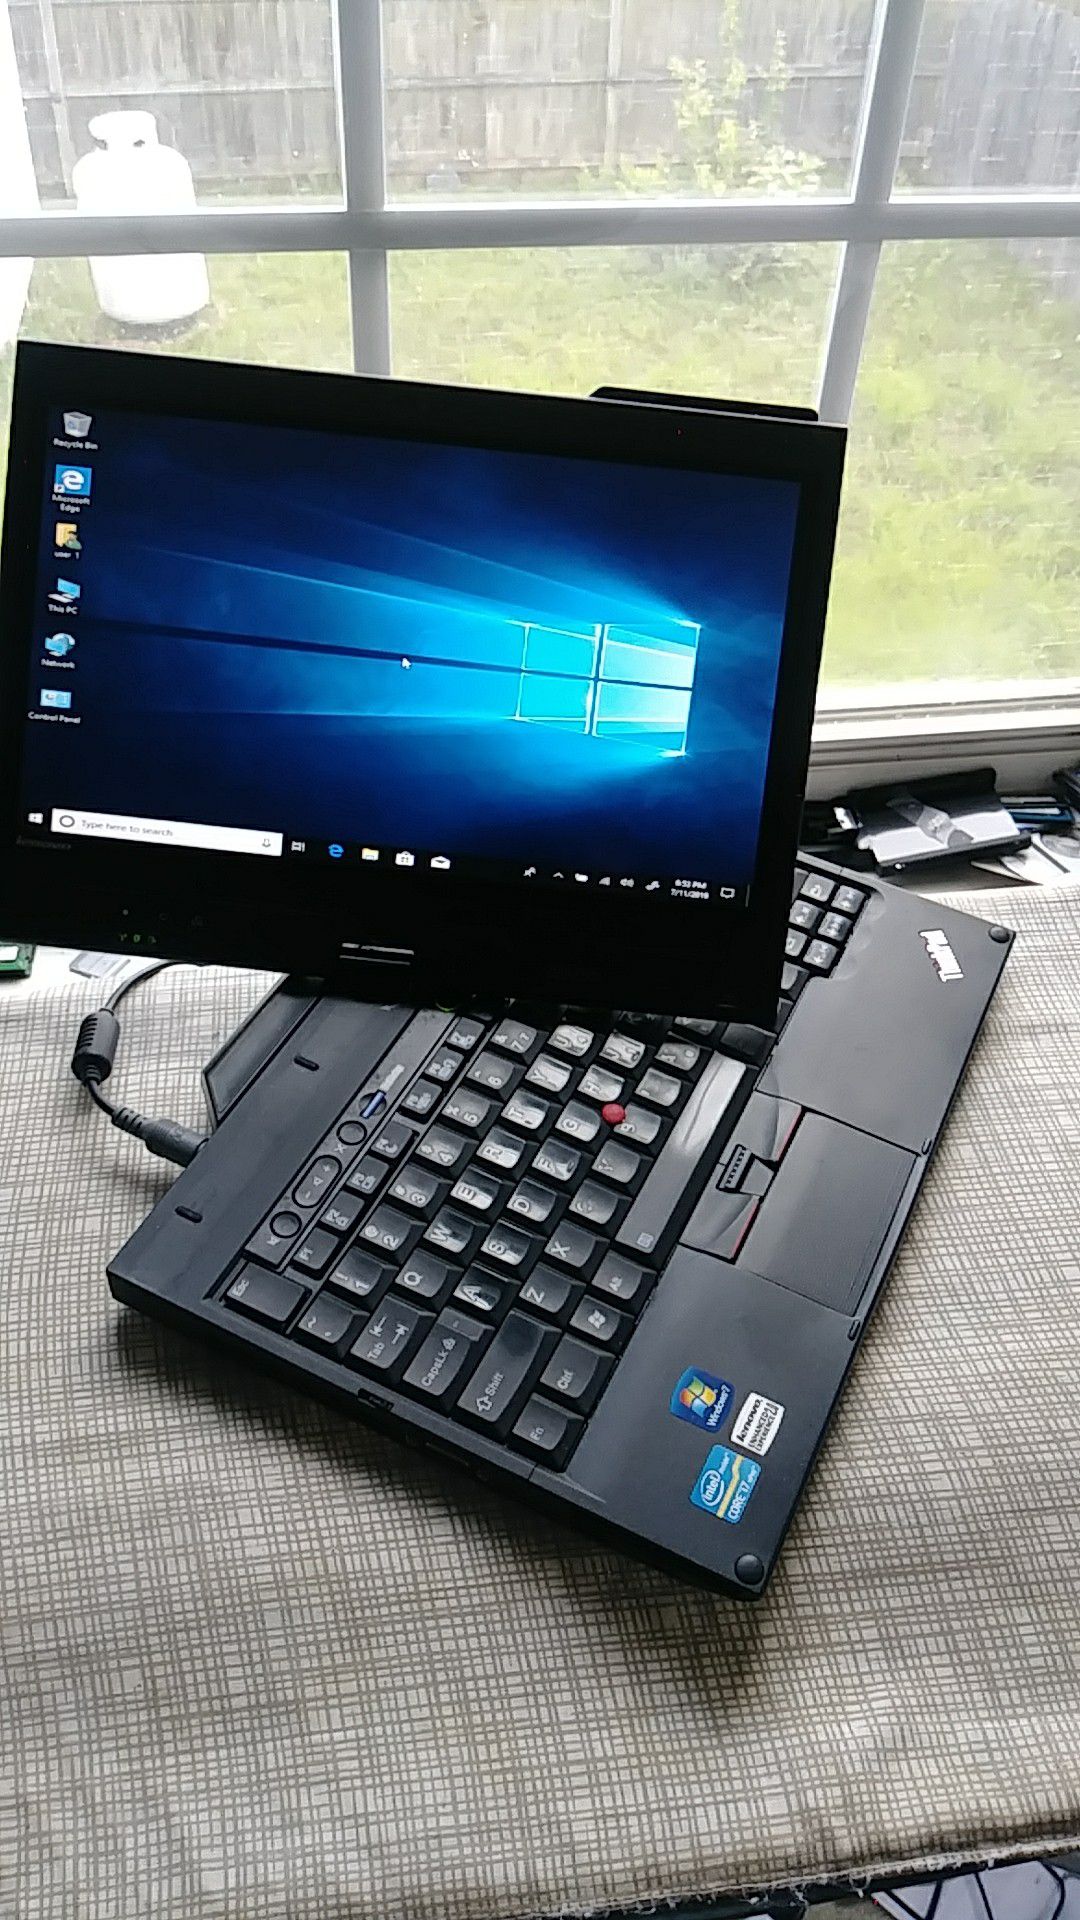 LENOVO THINKPAD X220 core i7, 256 SSD, 8gig ram, webcam, screen pen, win.10-mf. for in Raleigh, NC - OfferUp